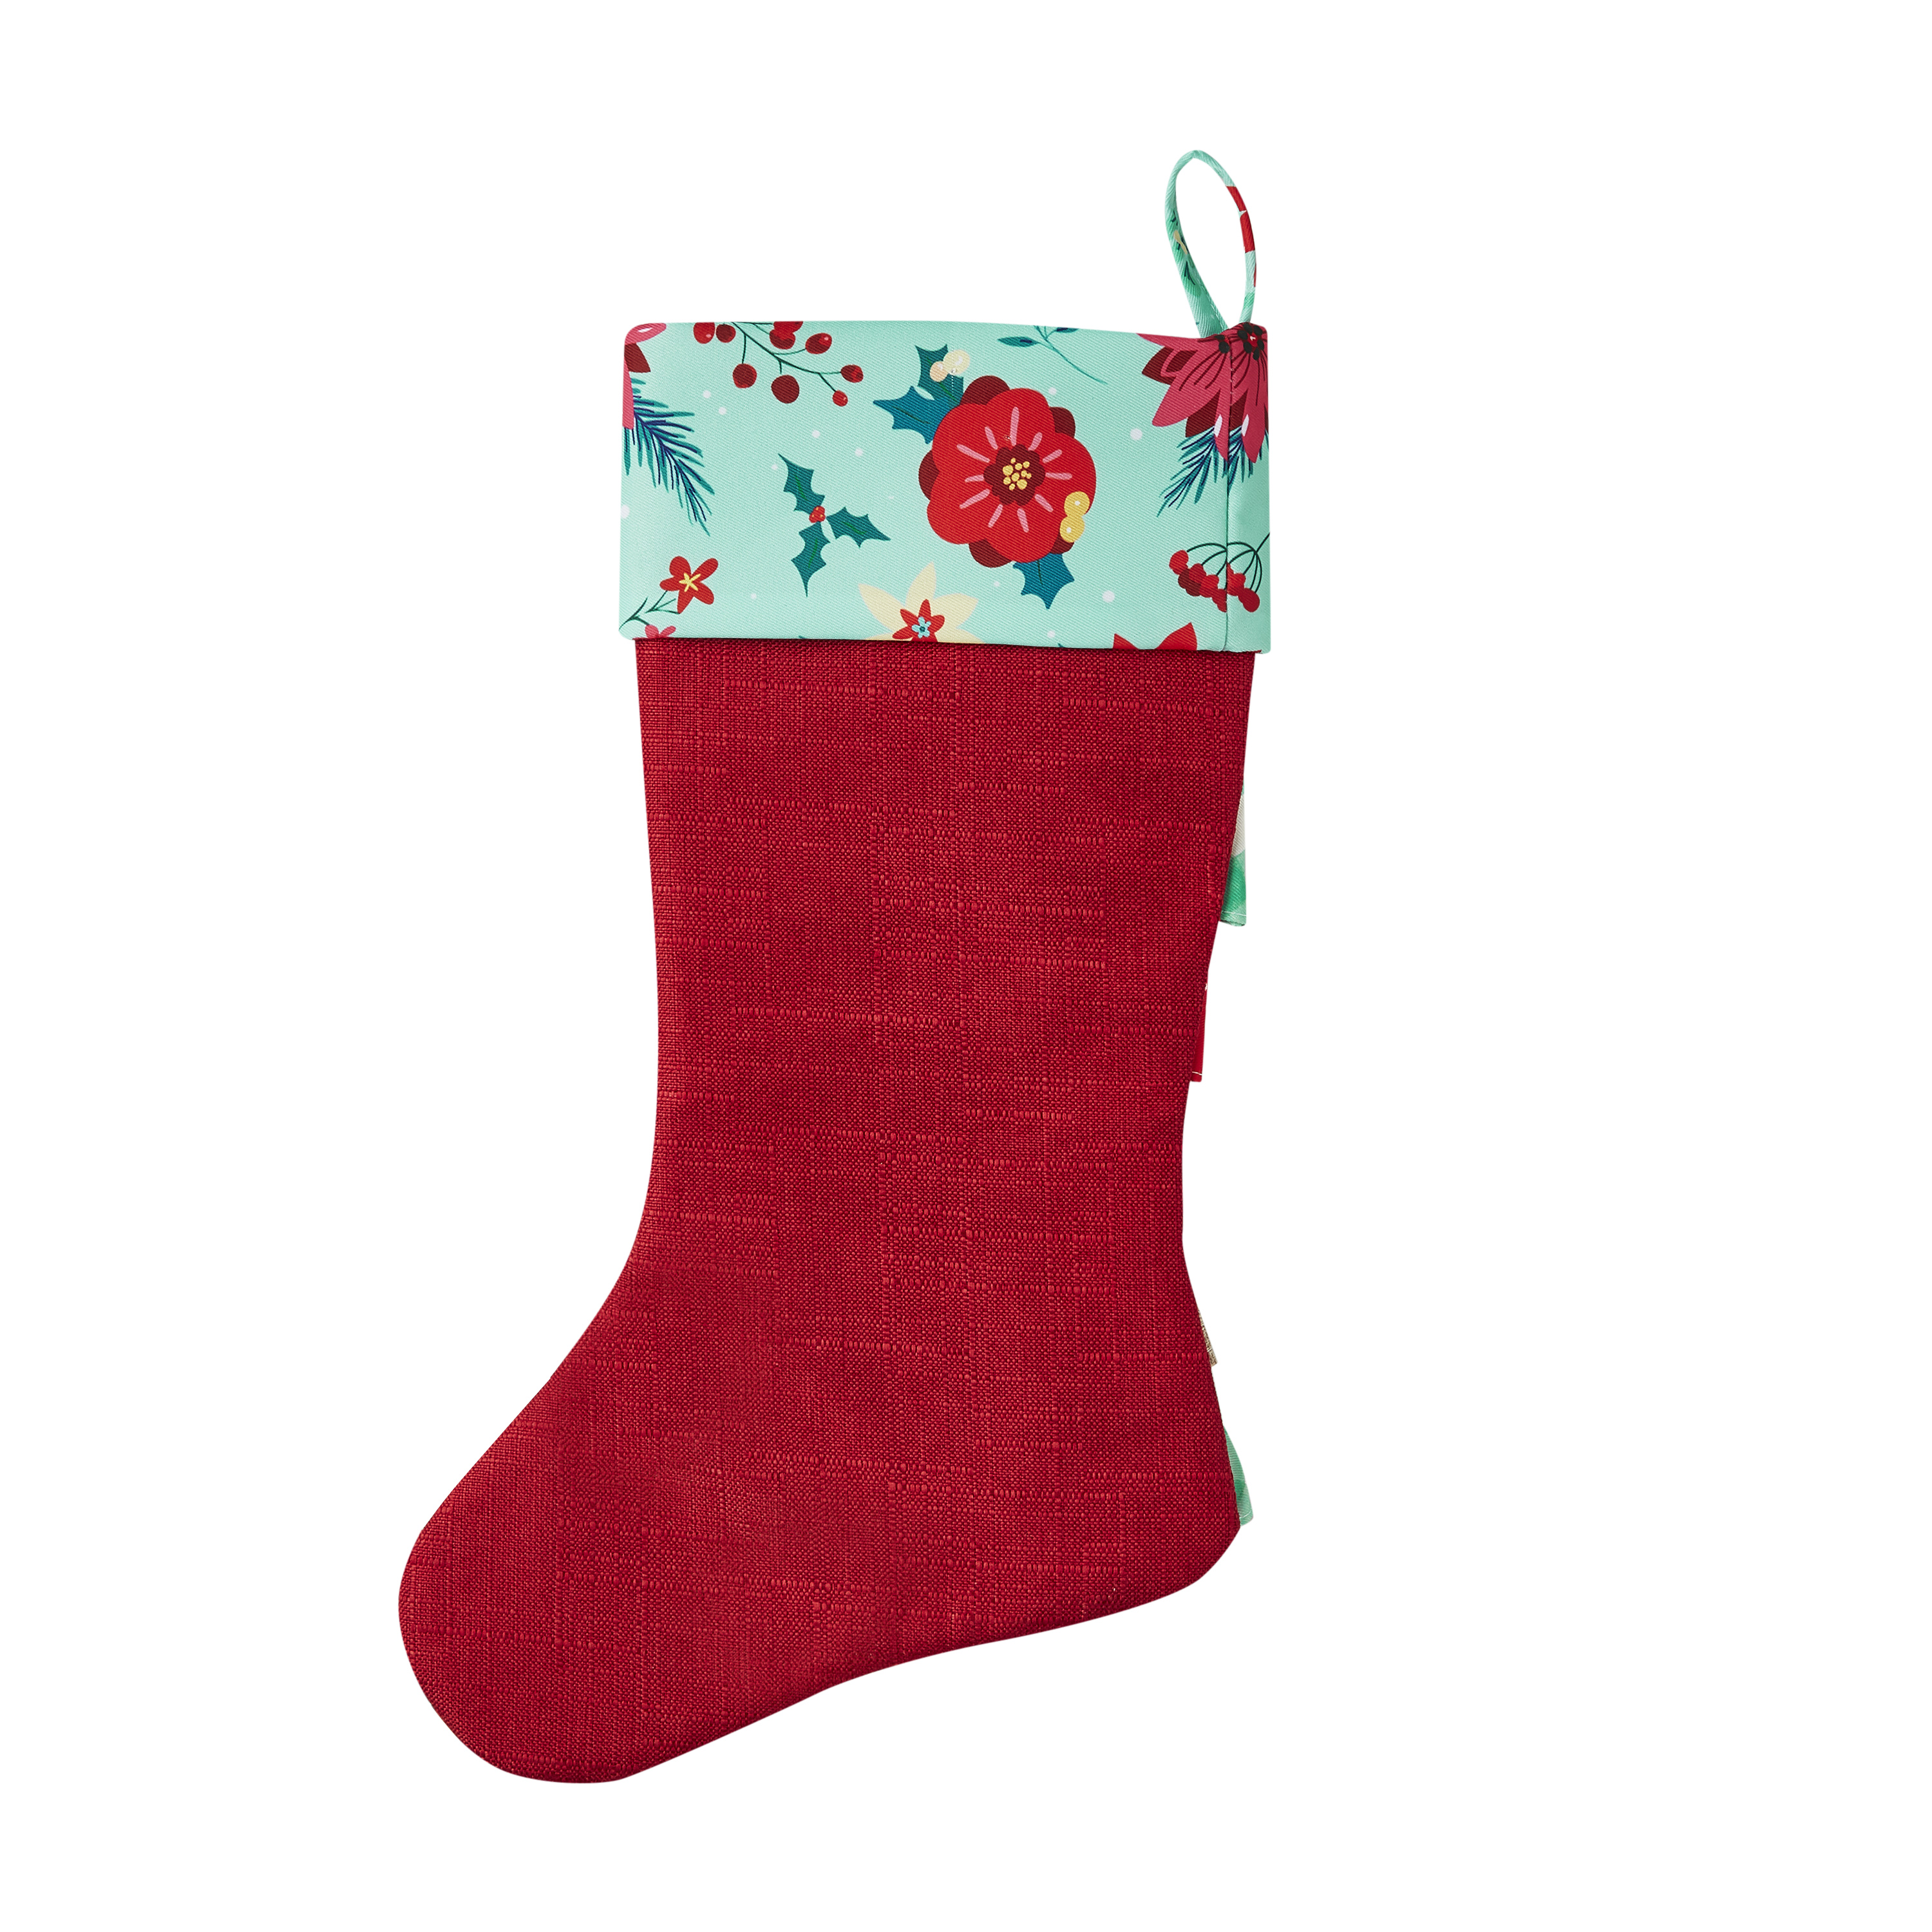 The Pioneer Woman Floral Ruffle Multi-color Christmas Stocking, 20" - image 3 of 5